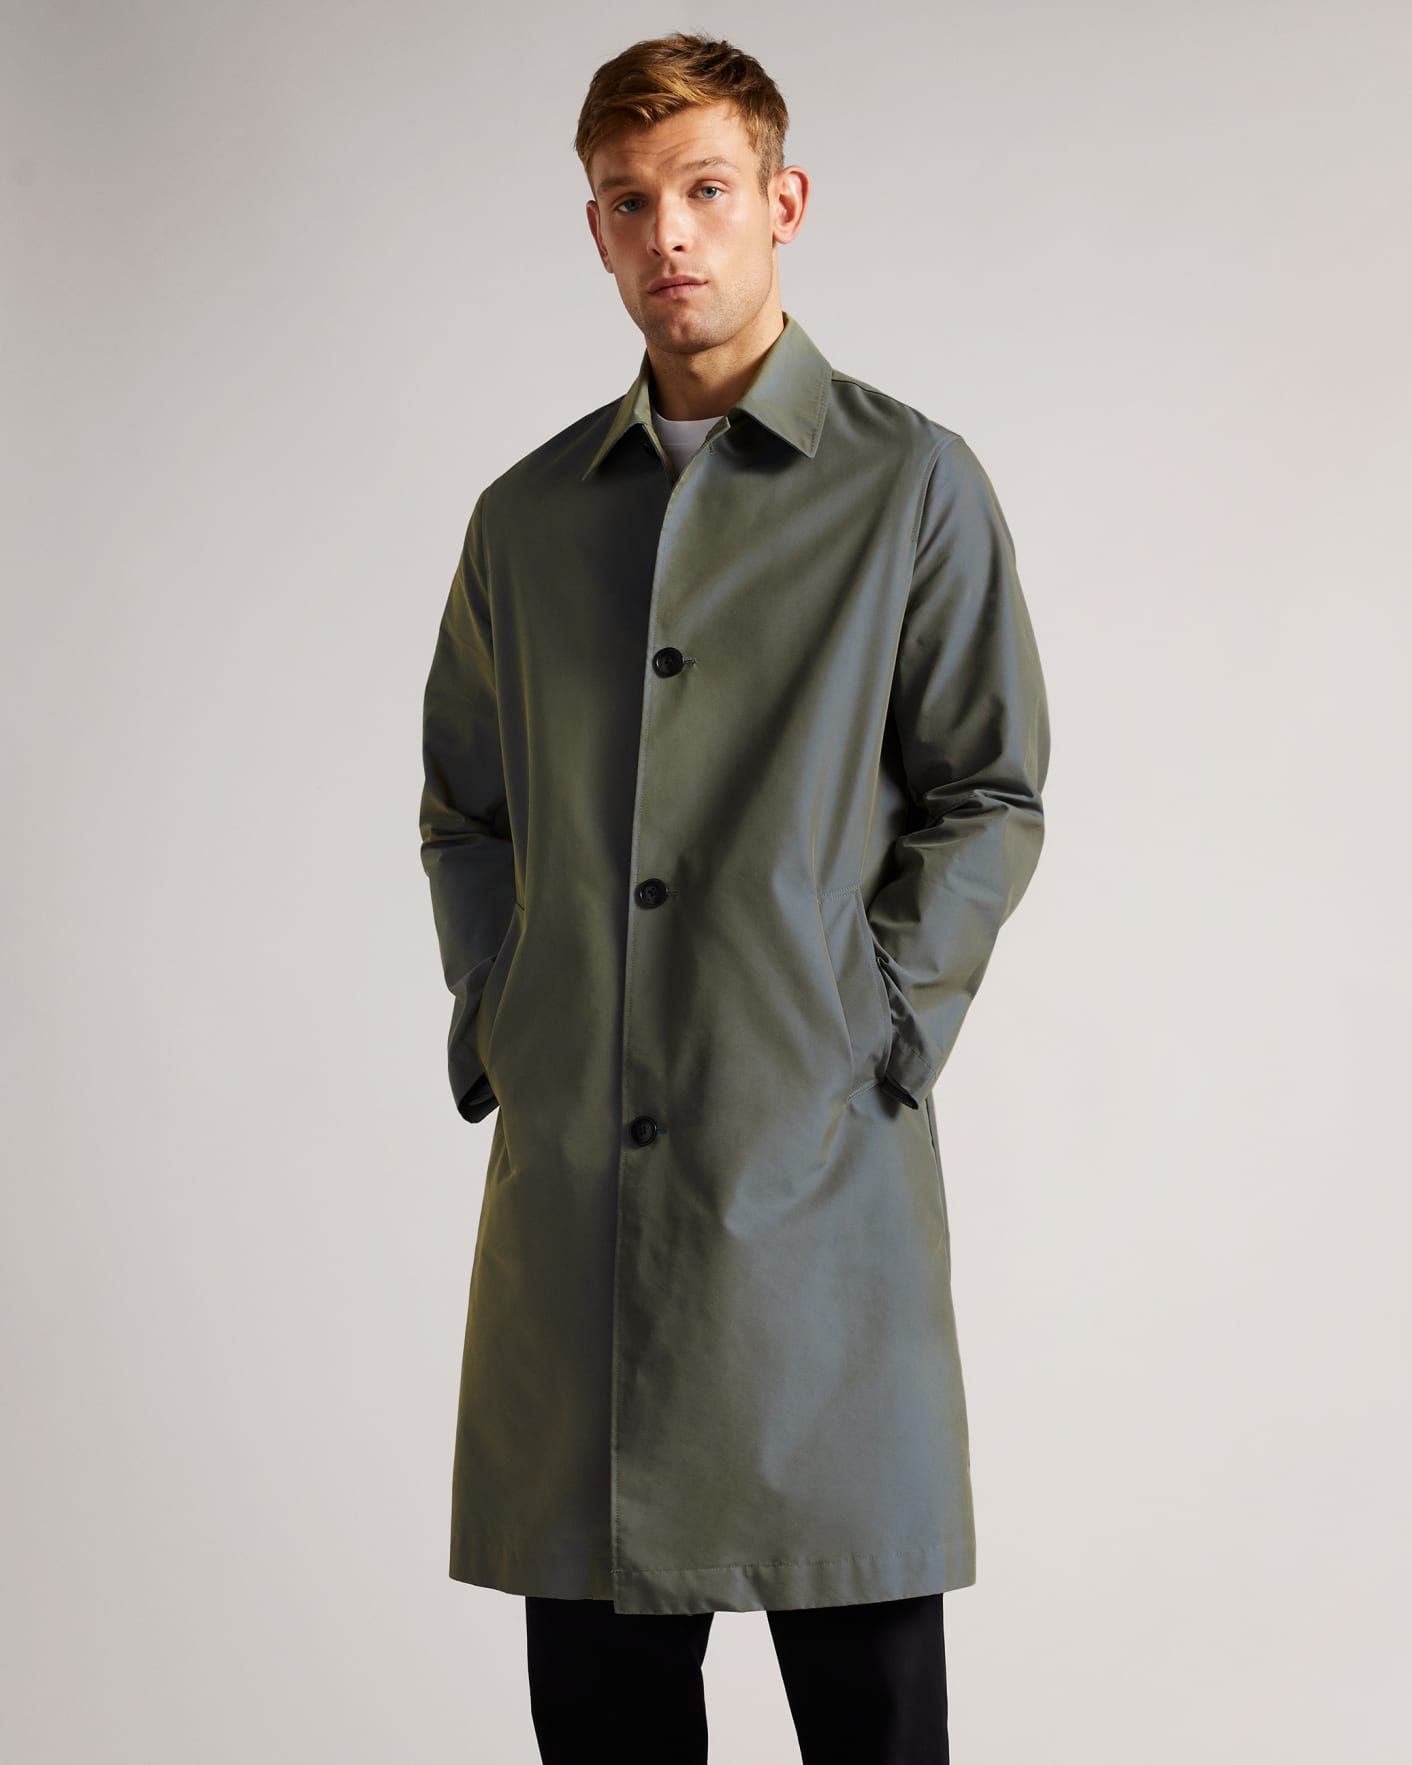 HEVER - MID-BLUE | Jackets & Coats | Ted Baker IE